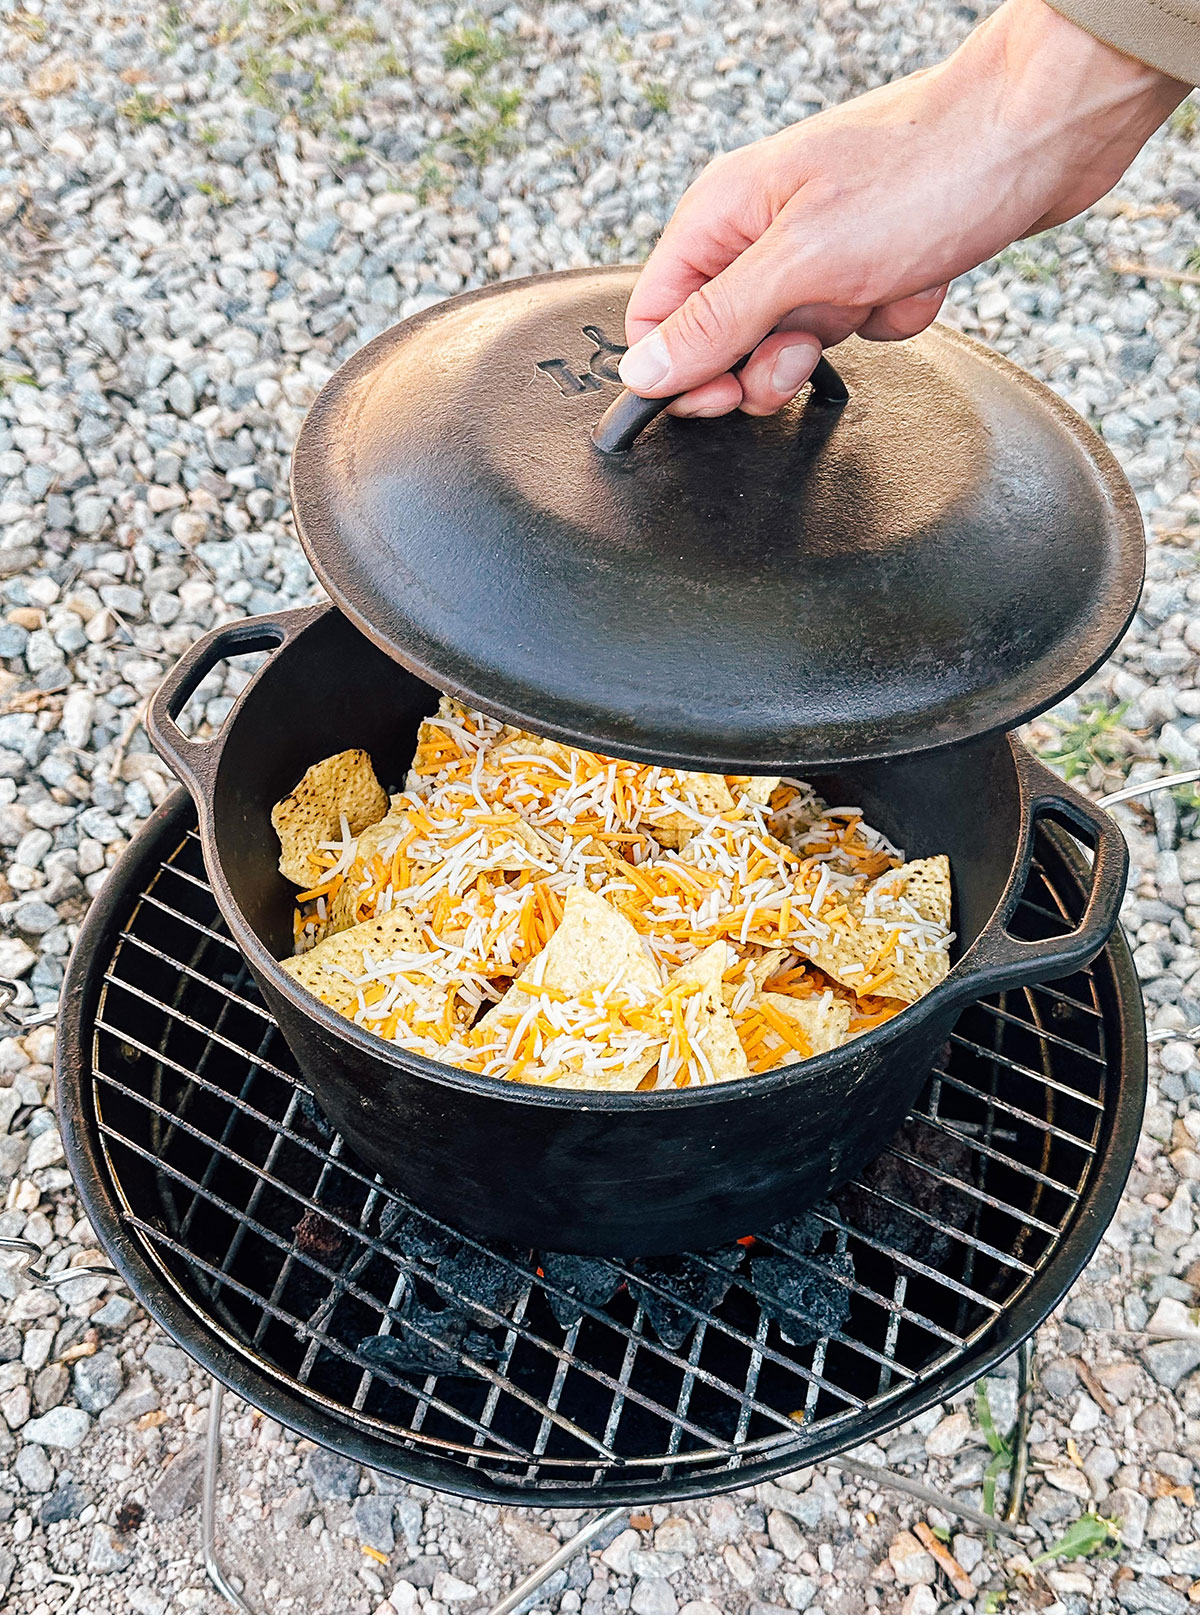 Chips and cheese in a Dutch oven over a coal stove.